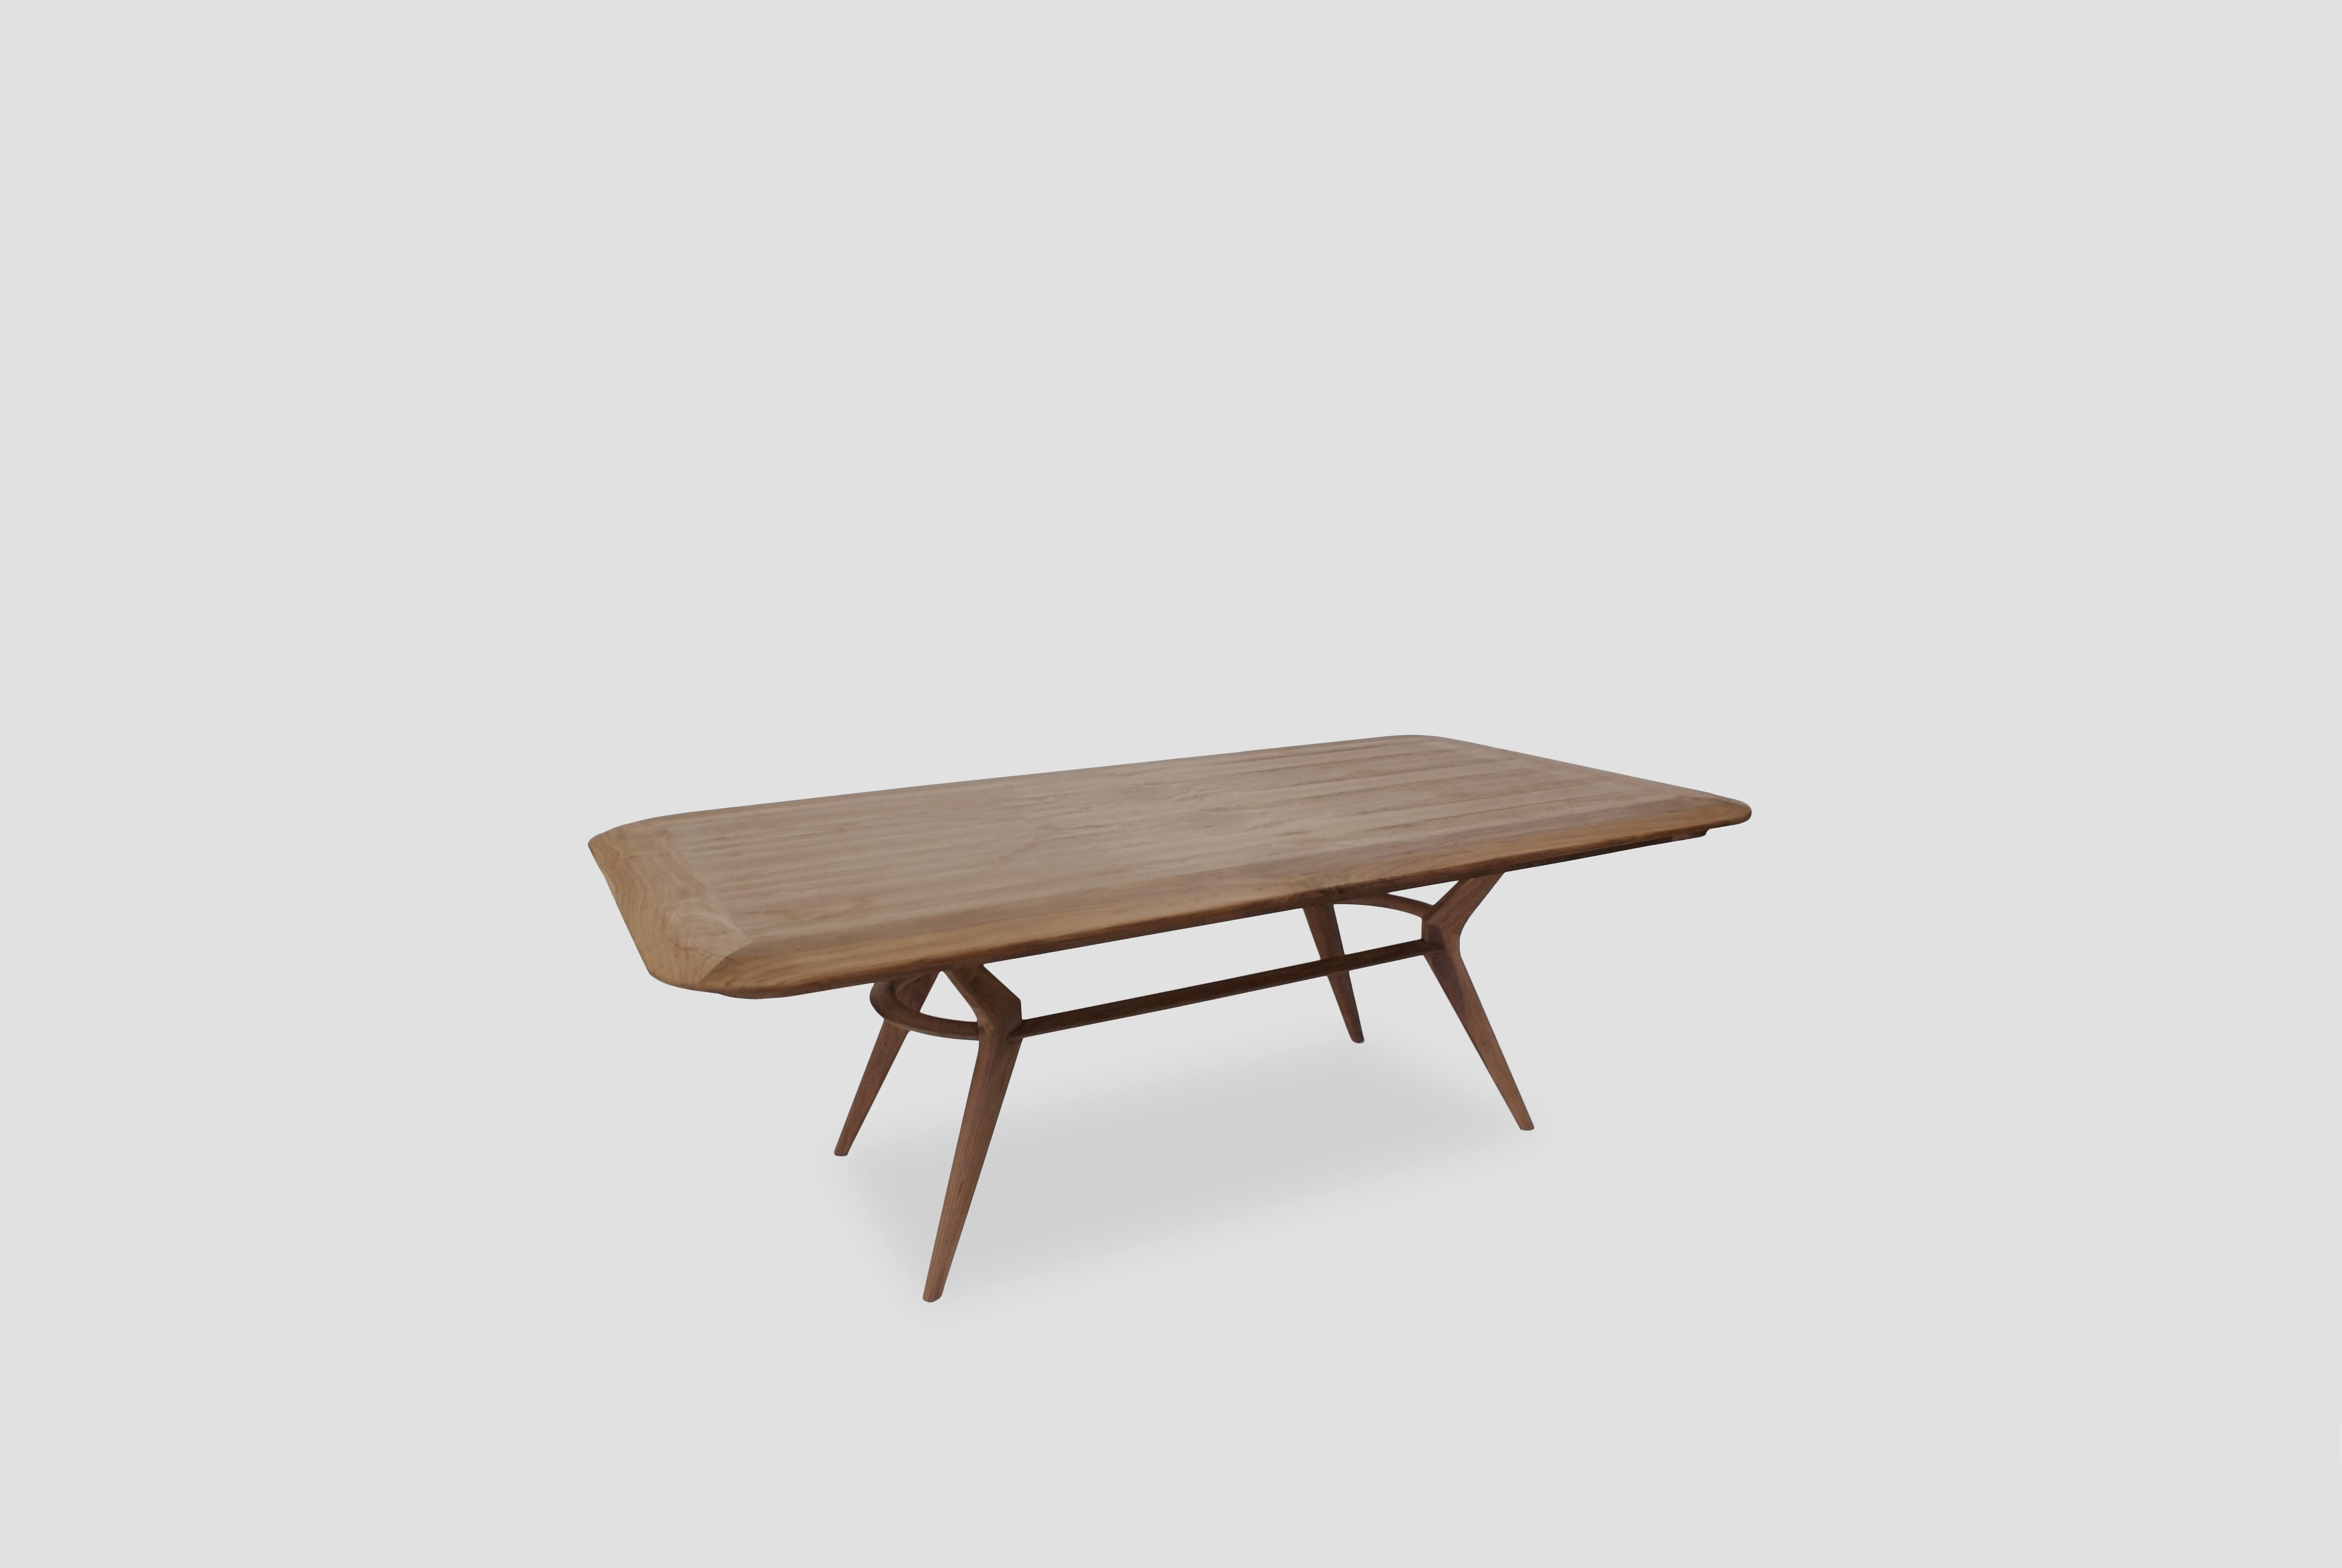 Boomerang dining table by Arturo Verástegui
Dimensions: D 220 x W 120 x H 75 cm
Materials: walnut wood.

Rectangular dining table made of walnut.

Arturo Verástegui has been the director and founder of BREUER since 2015. Arturo began his